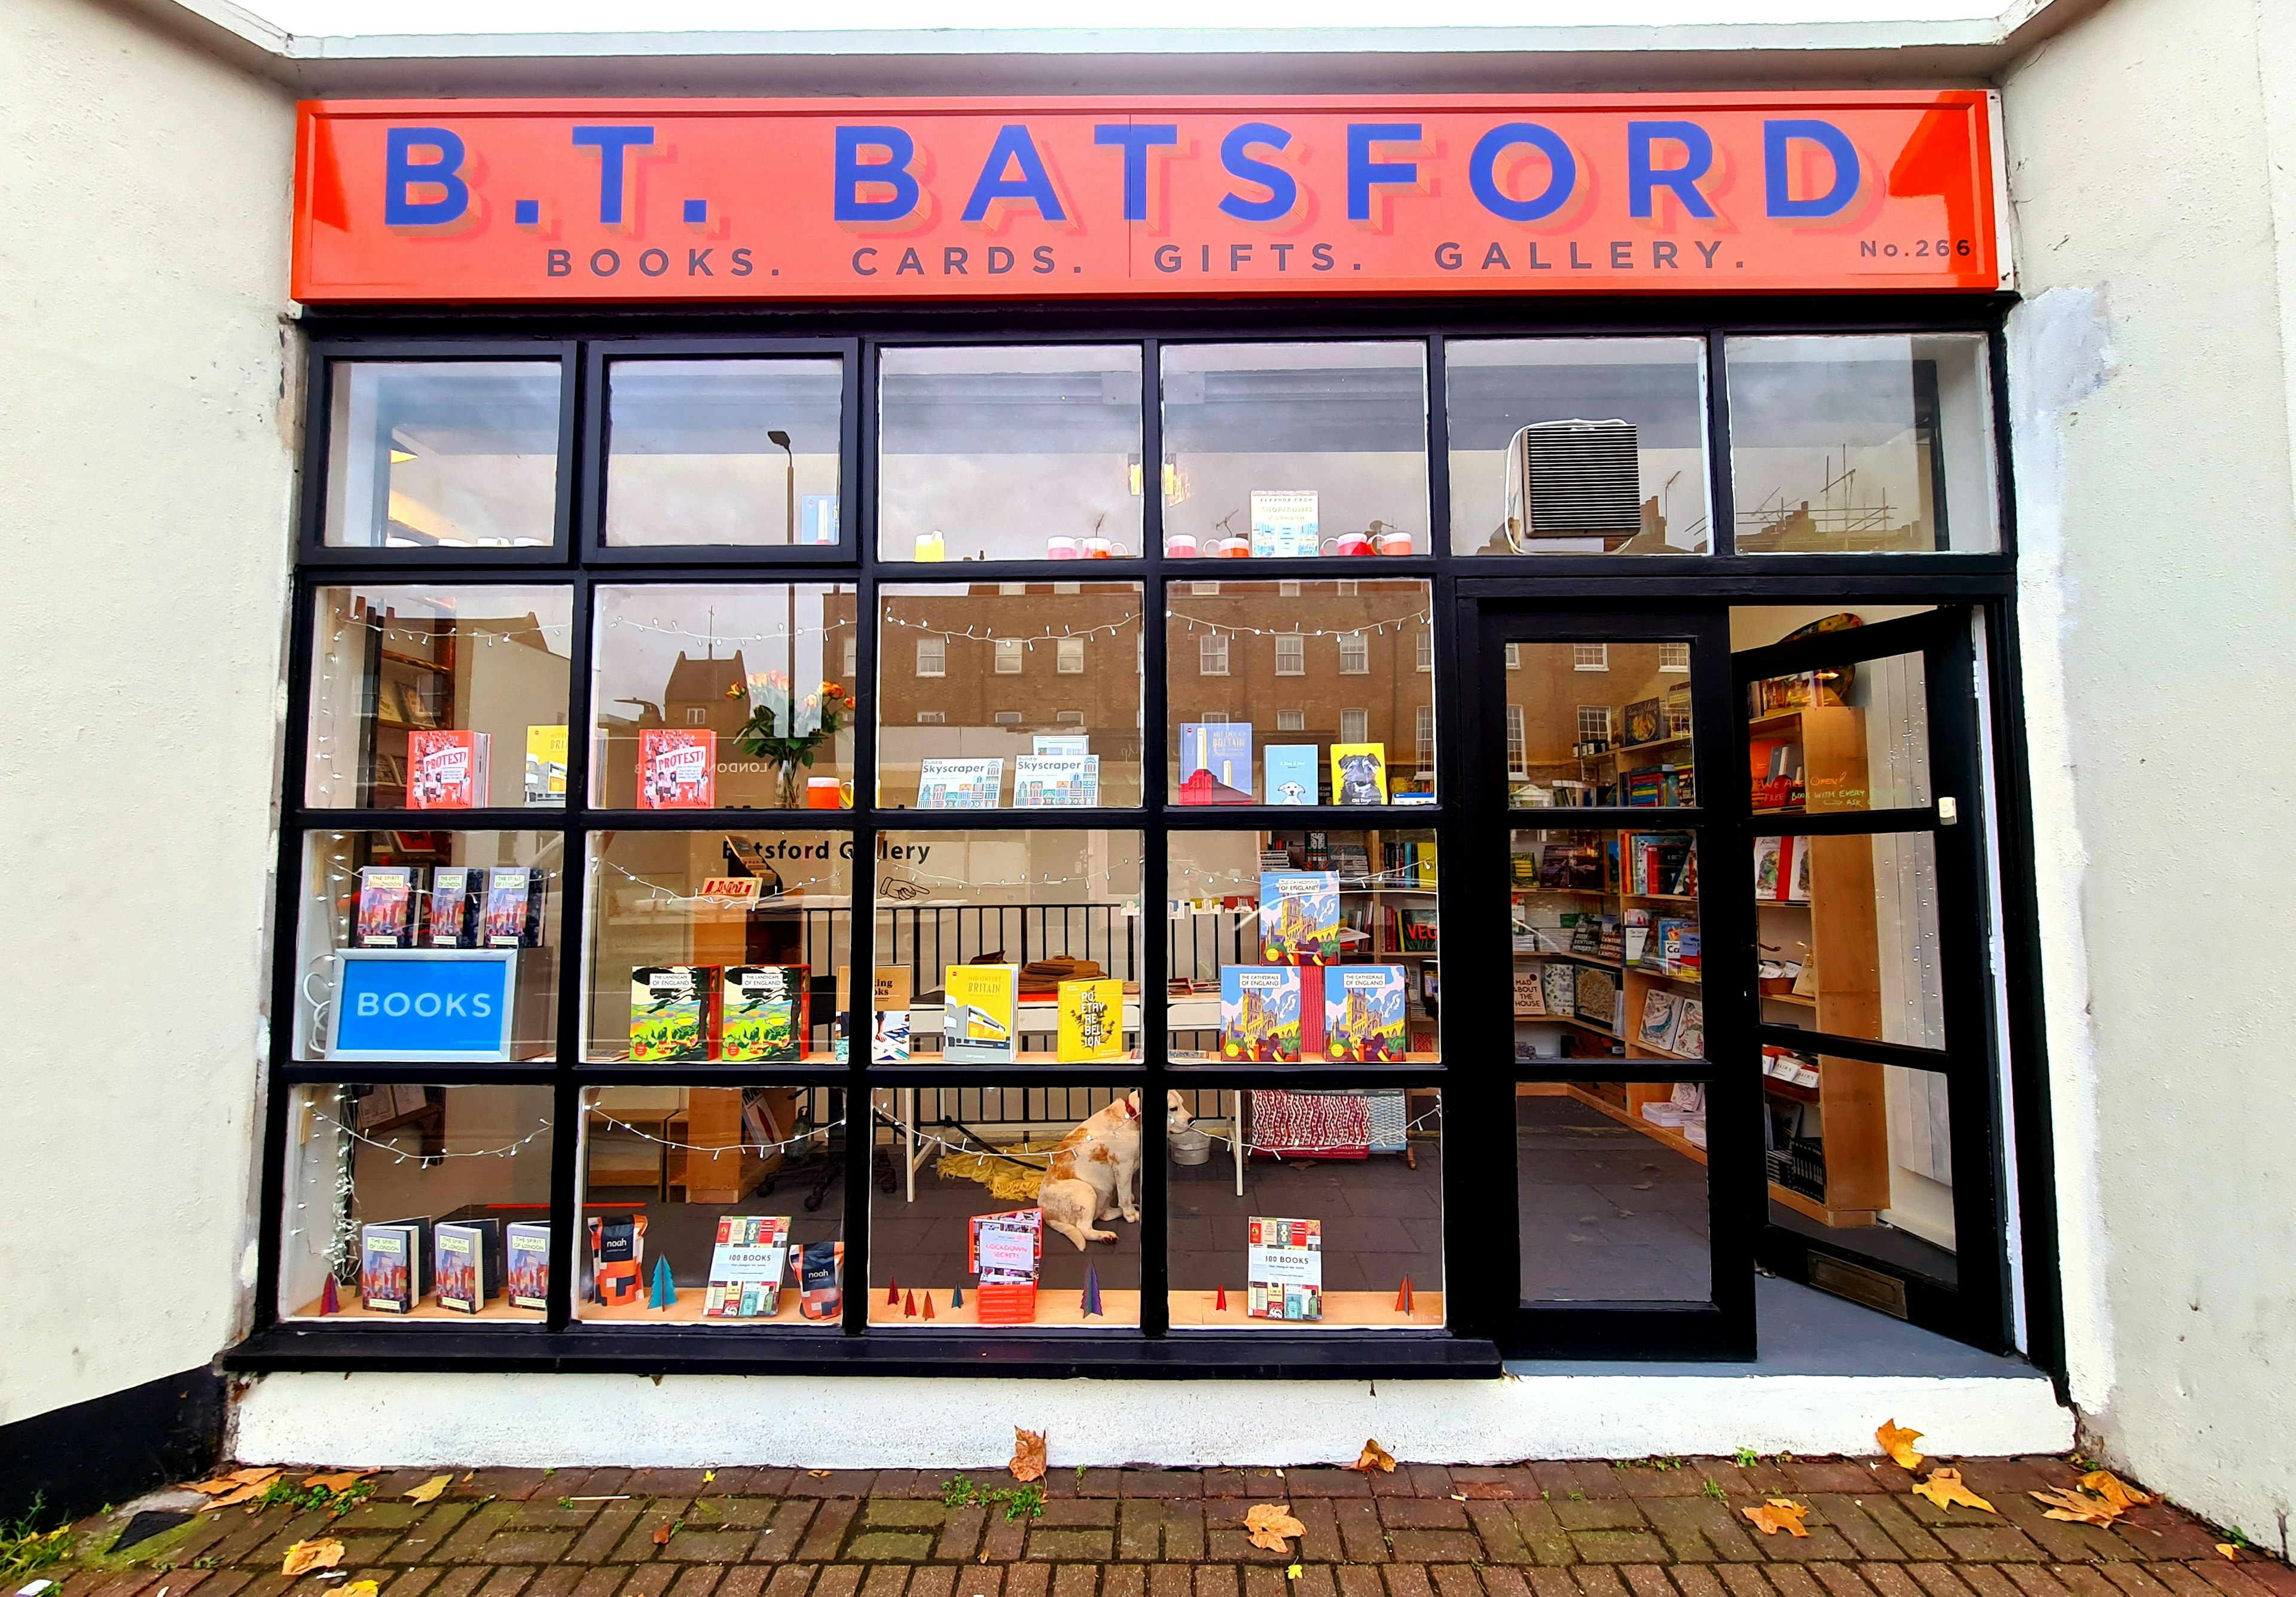 Film and Photo - B. T. Batsford Gallery